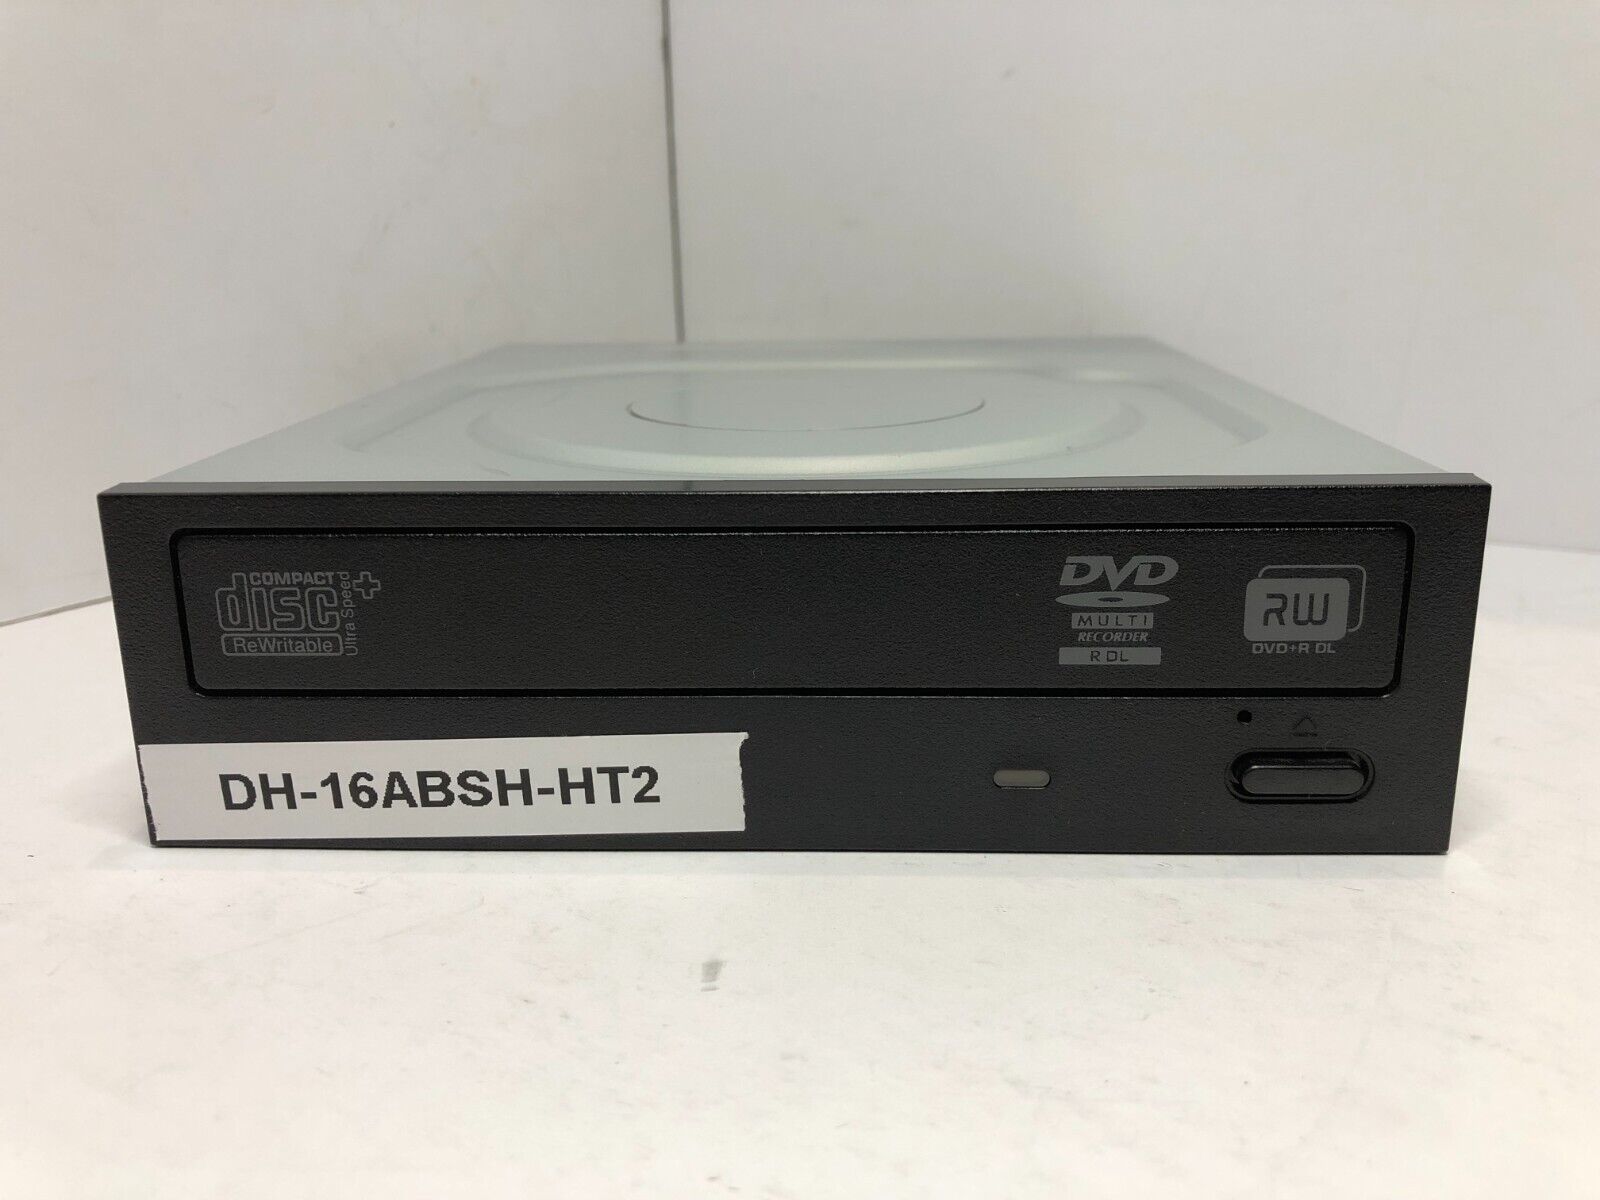 Philips HP DH-16ABSH-HT2 Multi Recorder DVD/CD-RW SATA | 660408-001 | Tested